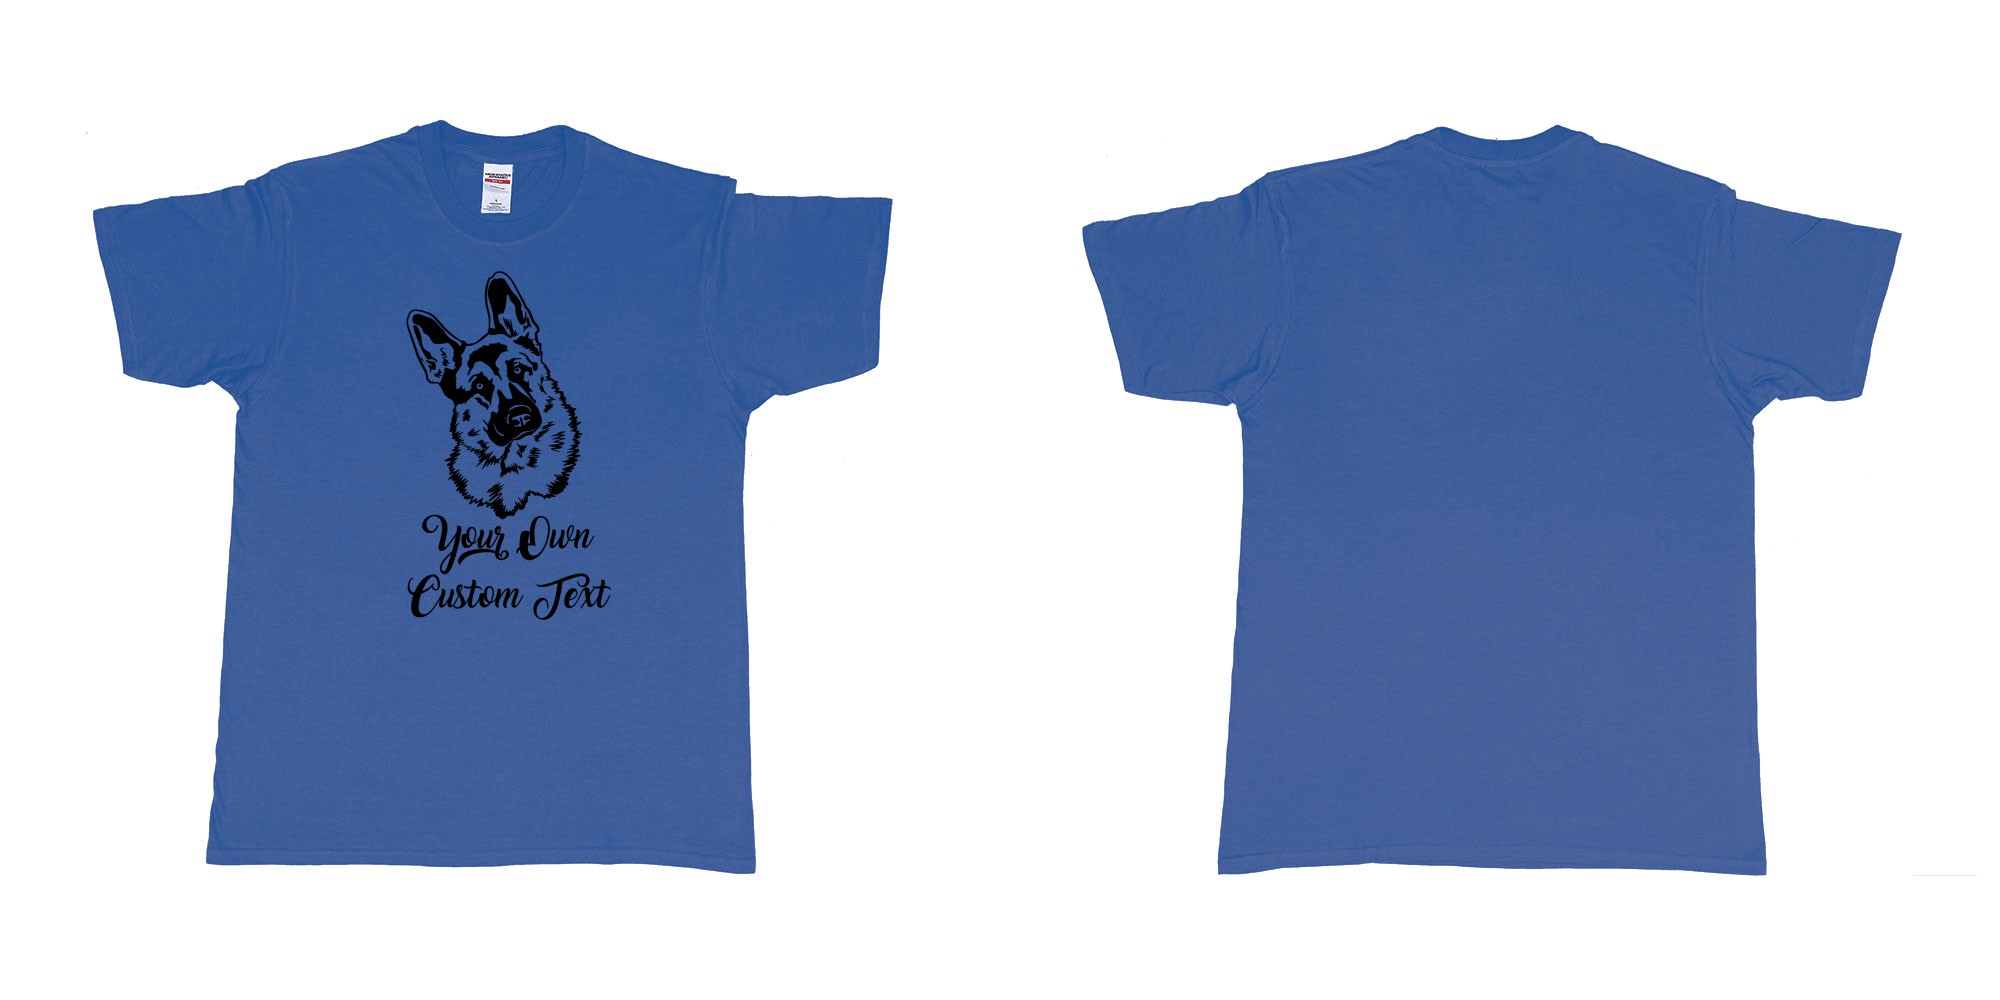 Custom tshirt design zack german shepherd tilts its head your own custom text in fabric color royal-blue choice your own text made in Bali by The Pirate Way